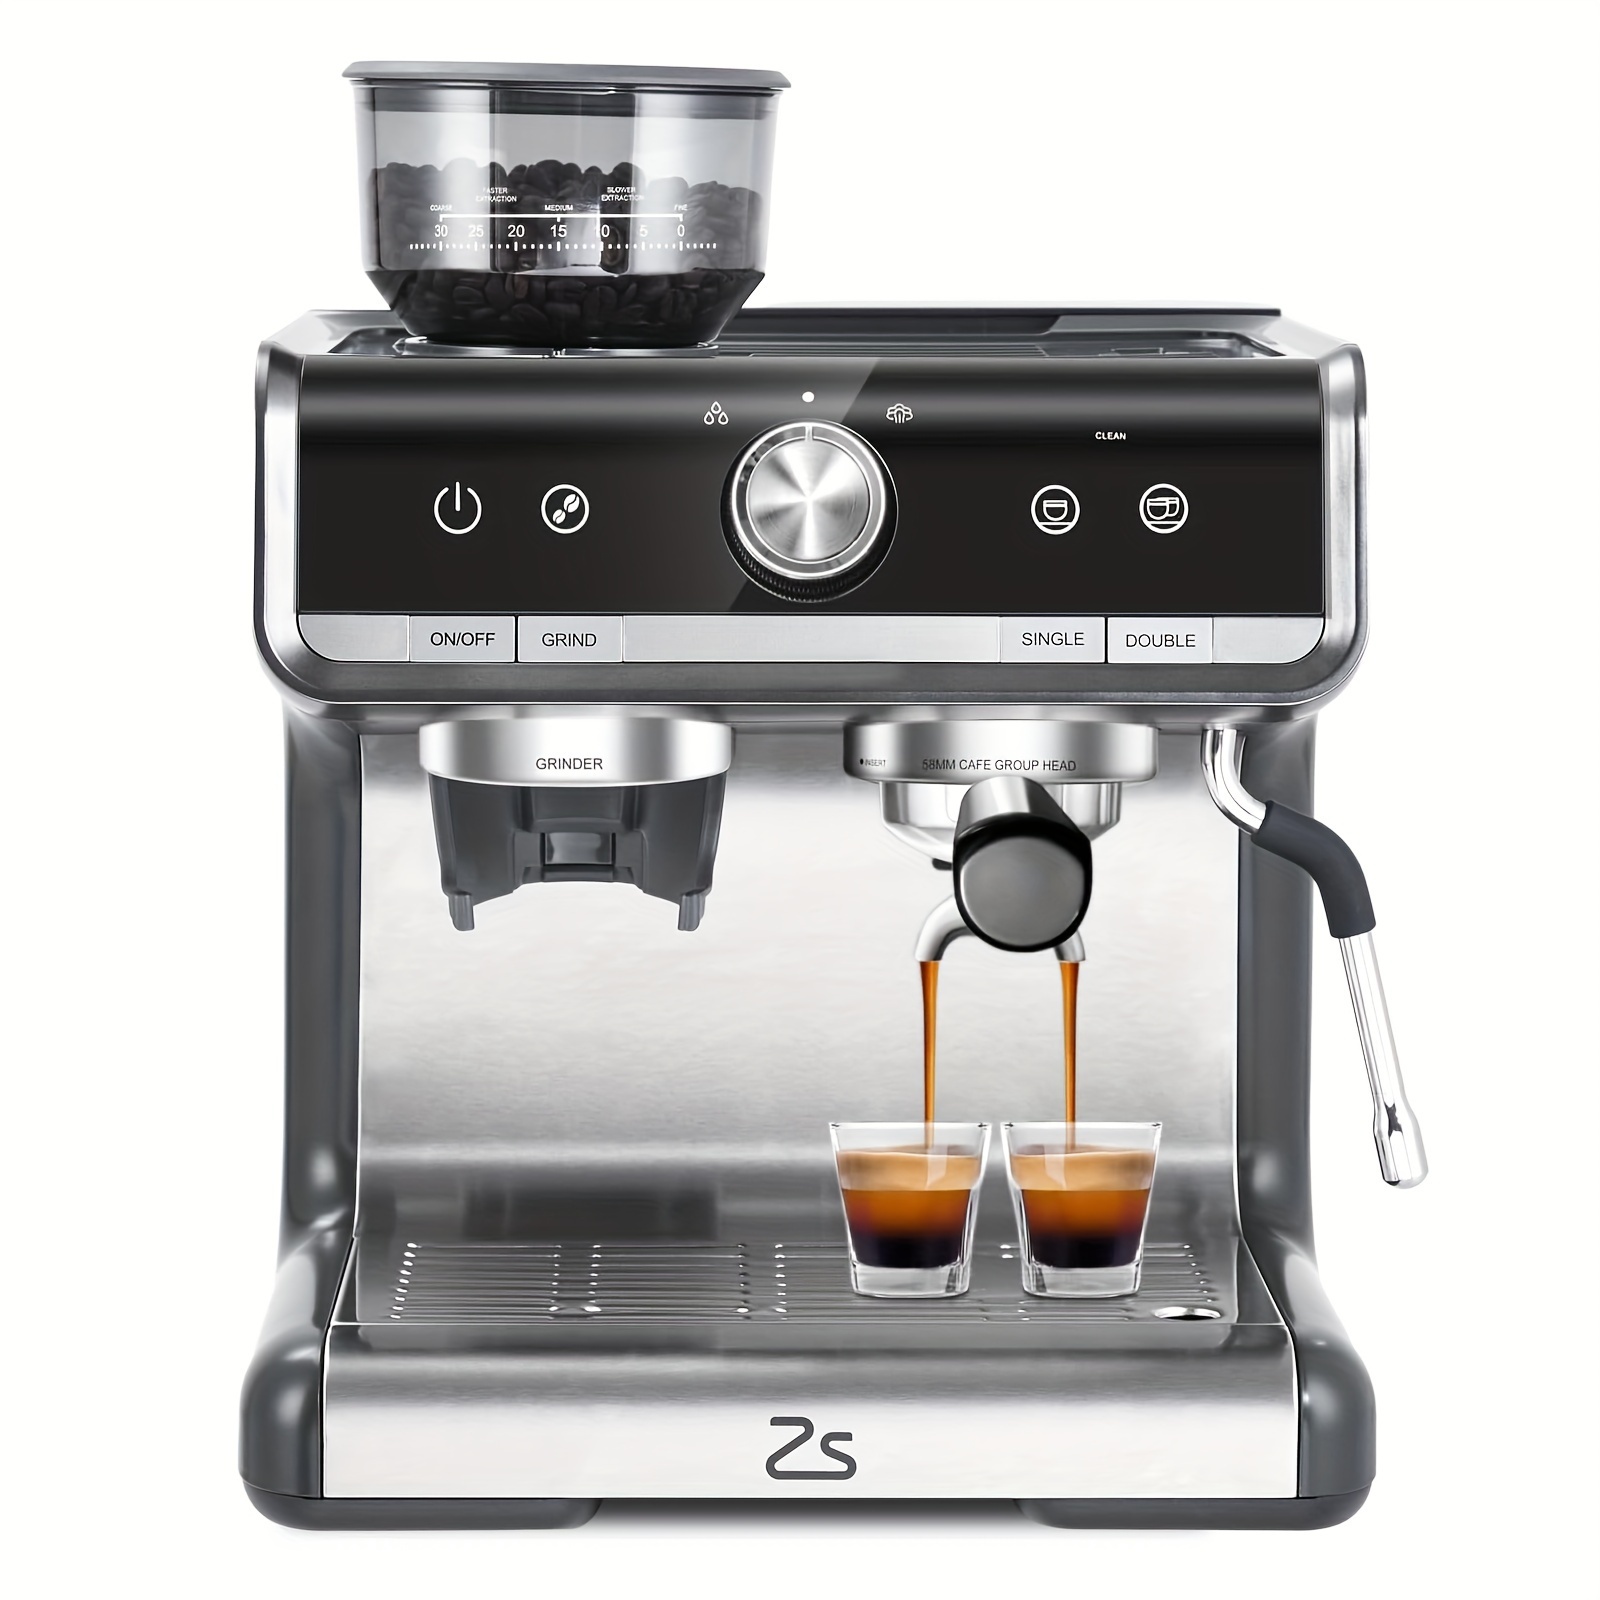 

Newest 20 Bar Coffee Espresso Machine, For Cappuccino, Latte, Automatic Espresso Maker With Milk Frother Steam Wand, Temp Control, 95 Oz Water Tank, For Home Barista, Restaurant